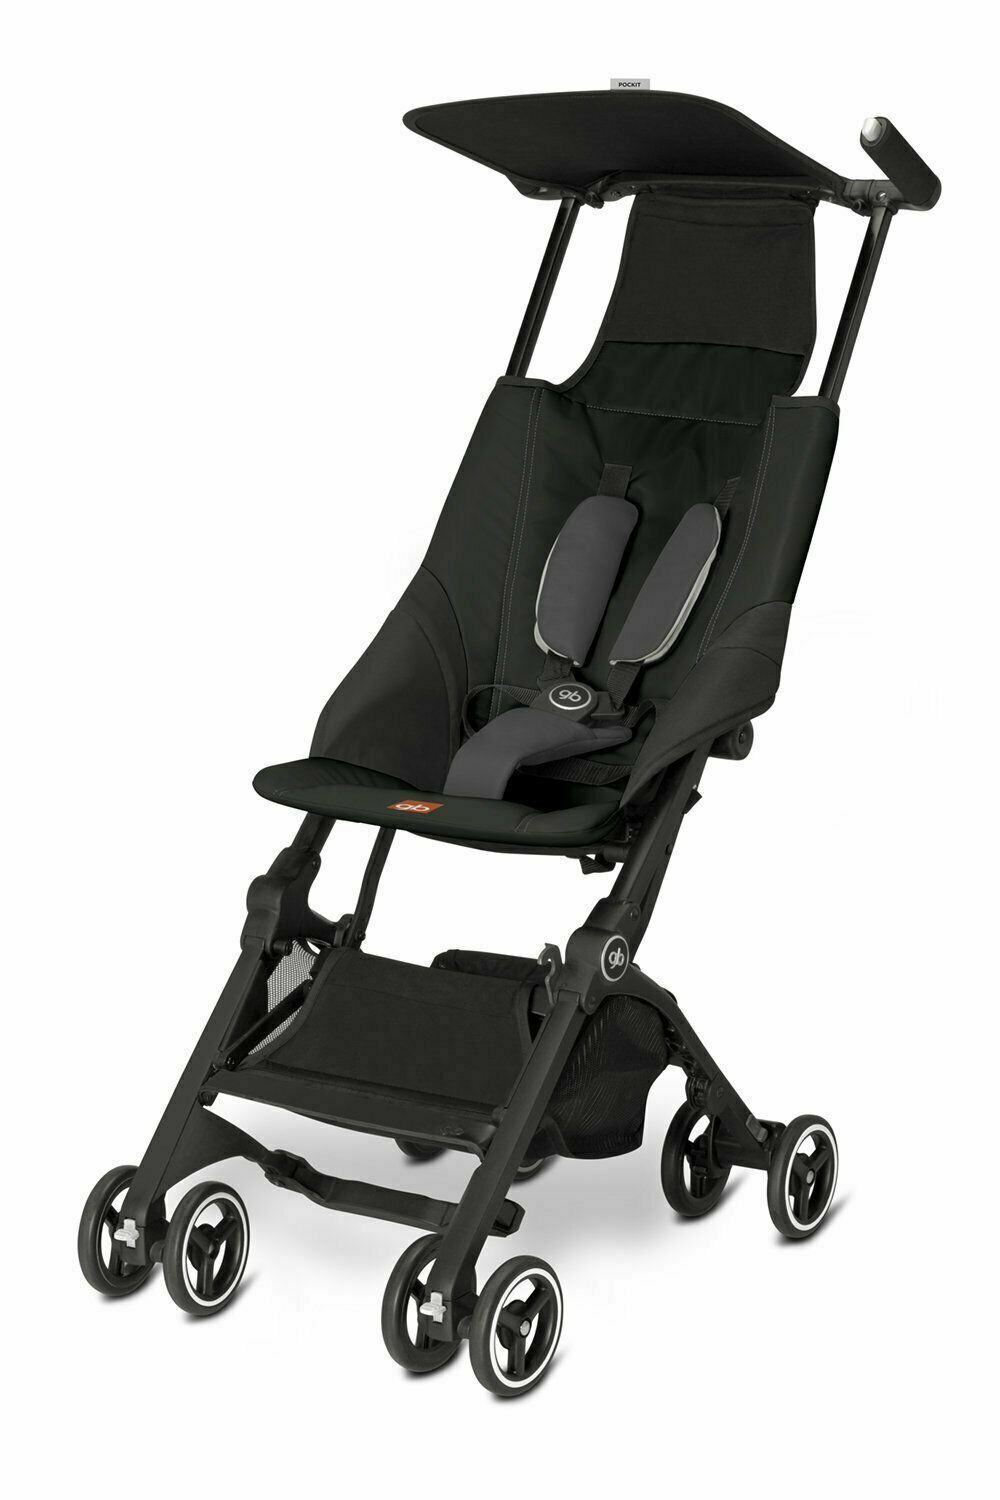 GB Pockit Compact Folding Stroller in Monument Black